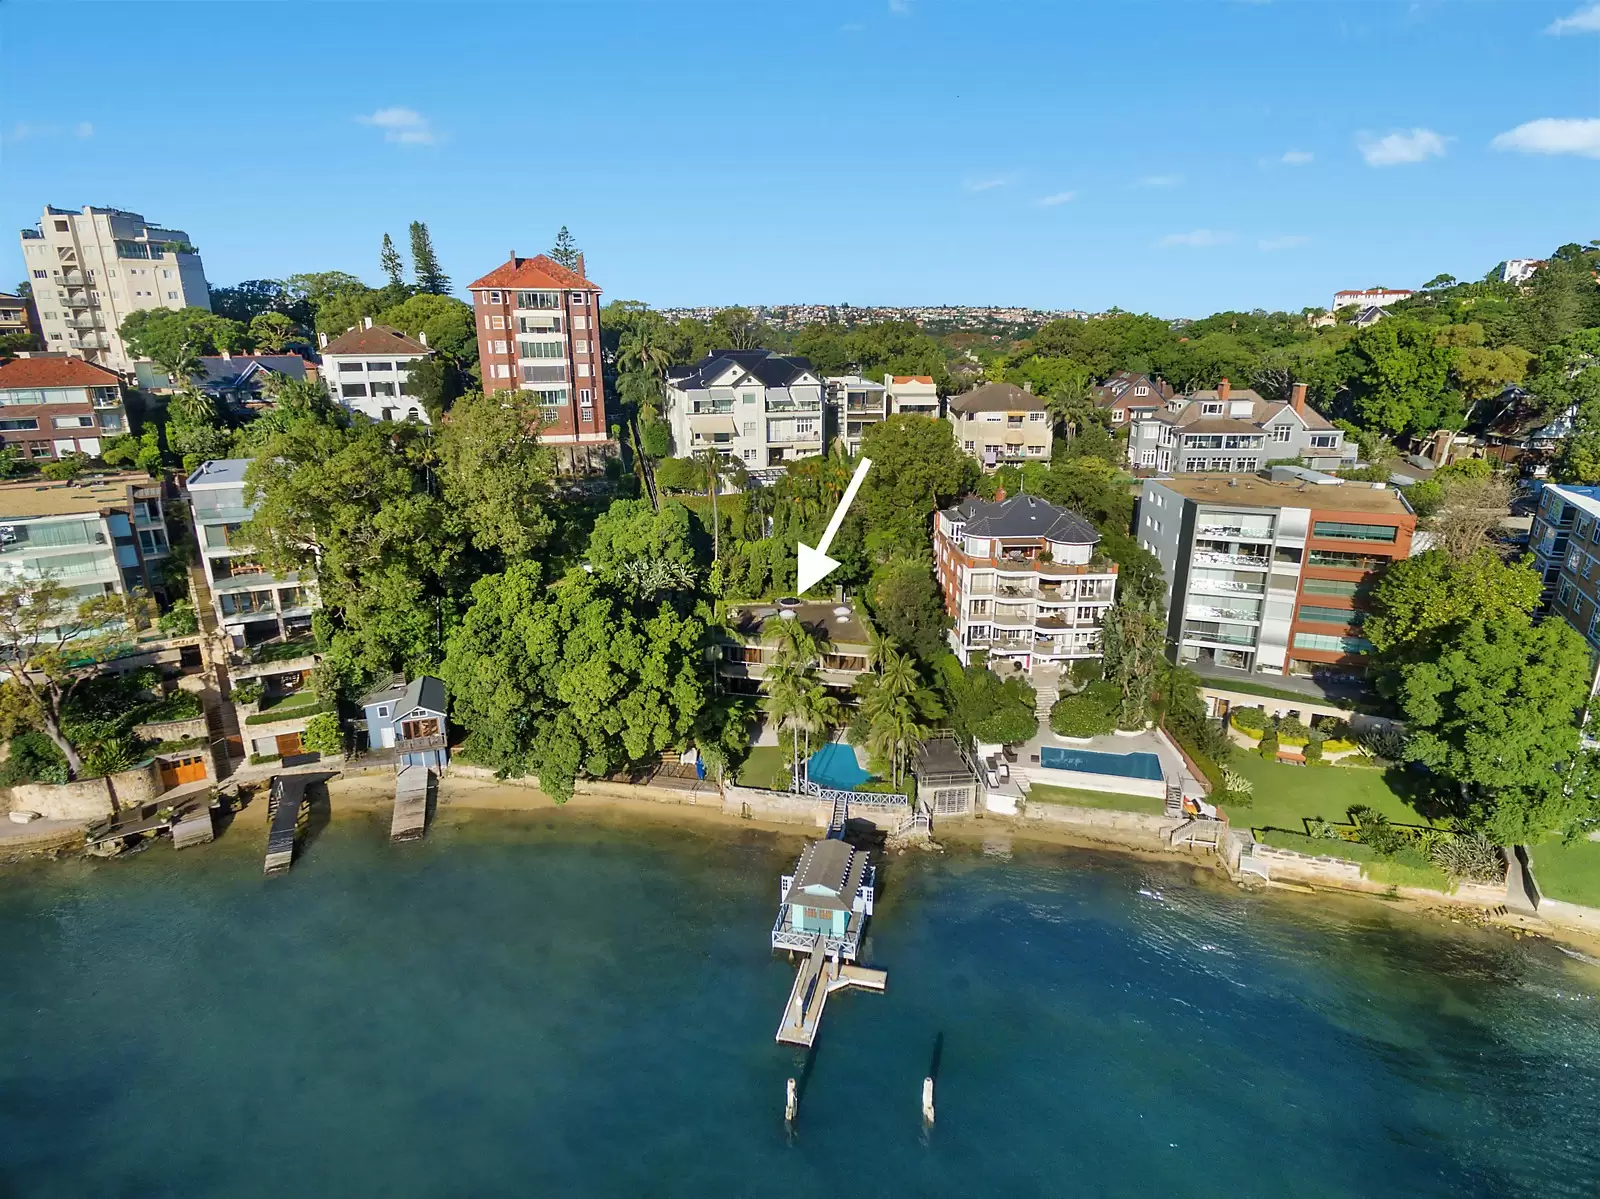 Photo #8: 20 Wolseley Road, Point Piper - Sold by Sydney Sotheby's International Realty